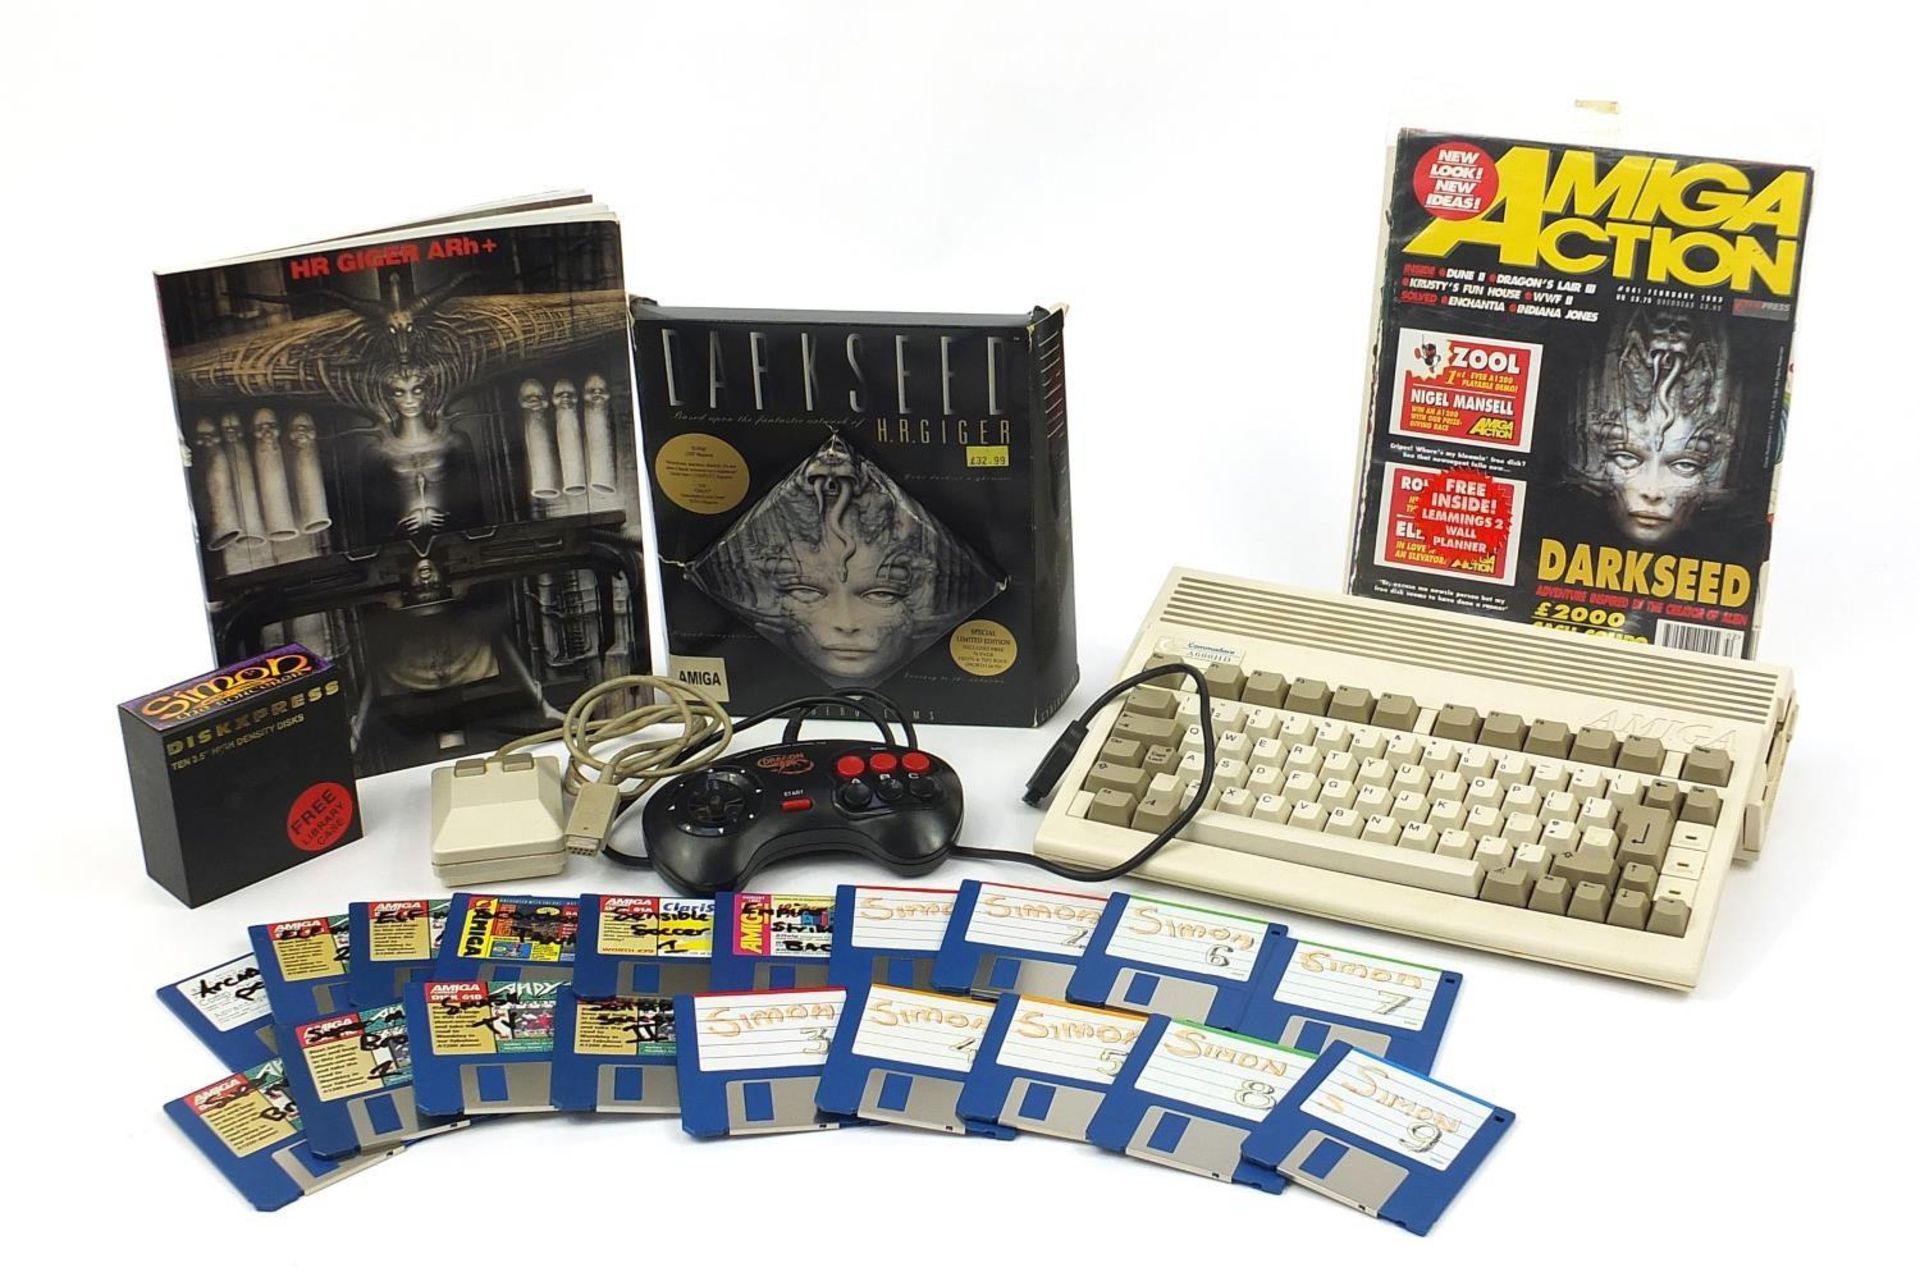 Vintage Commodore A600 HT computer system and games :